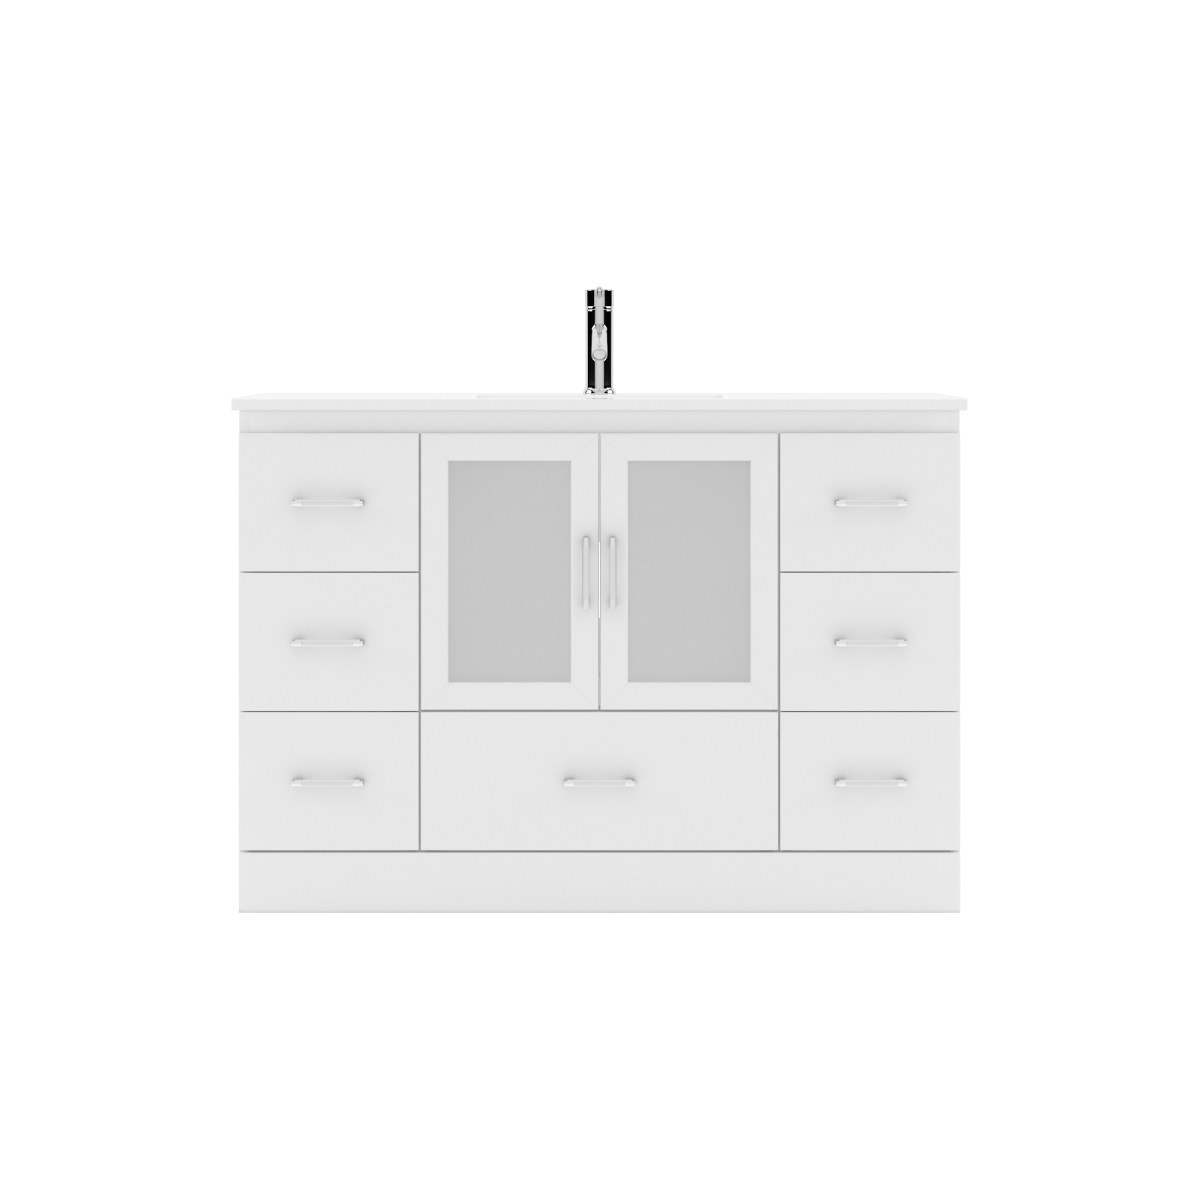 Virtu USA MS-6748-C-WH-NM 48 in. Zola Single Bathroom Vanity in White & Square Sink with Polished Chrome Faucet